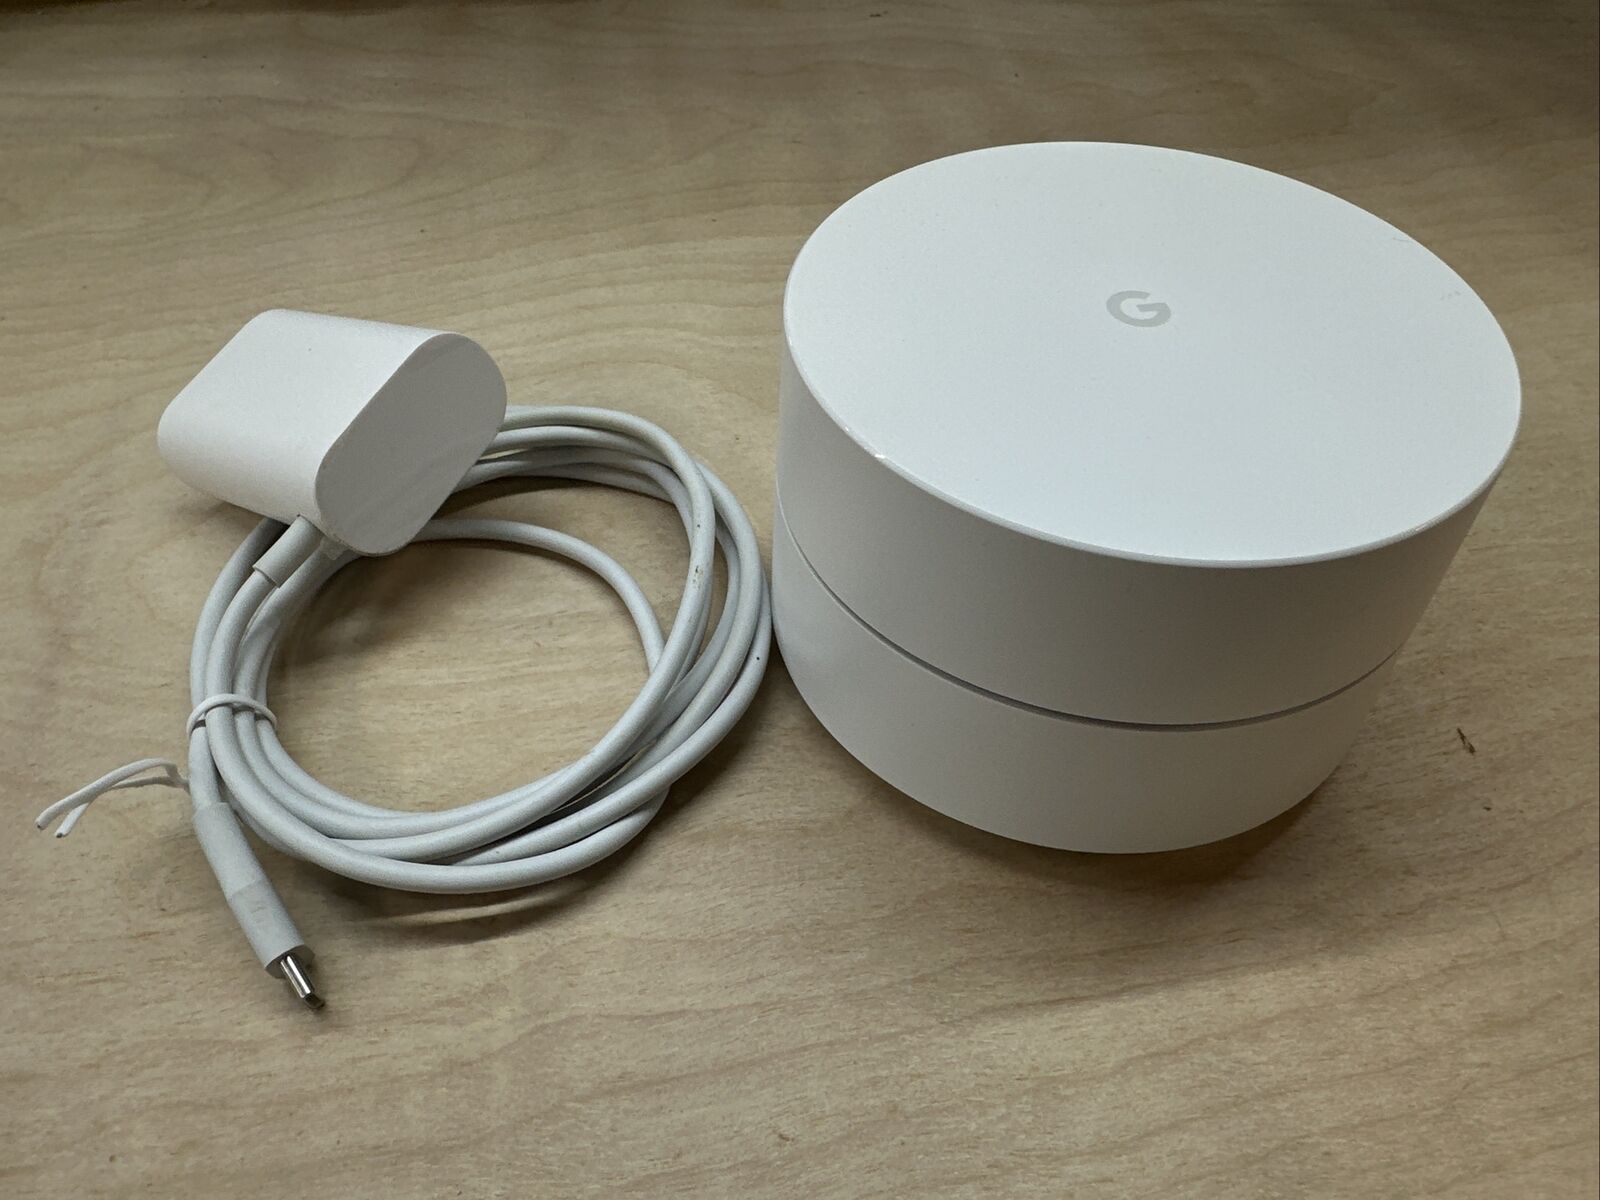 Google AC-1304 Wi-Fi Mesh Router System With Power Cord Tested Working